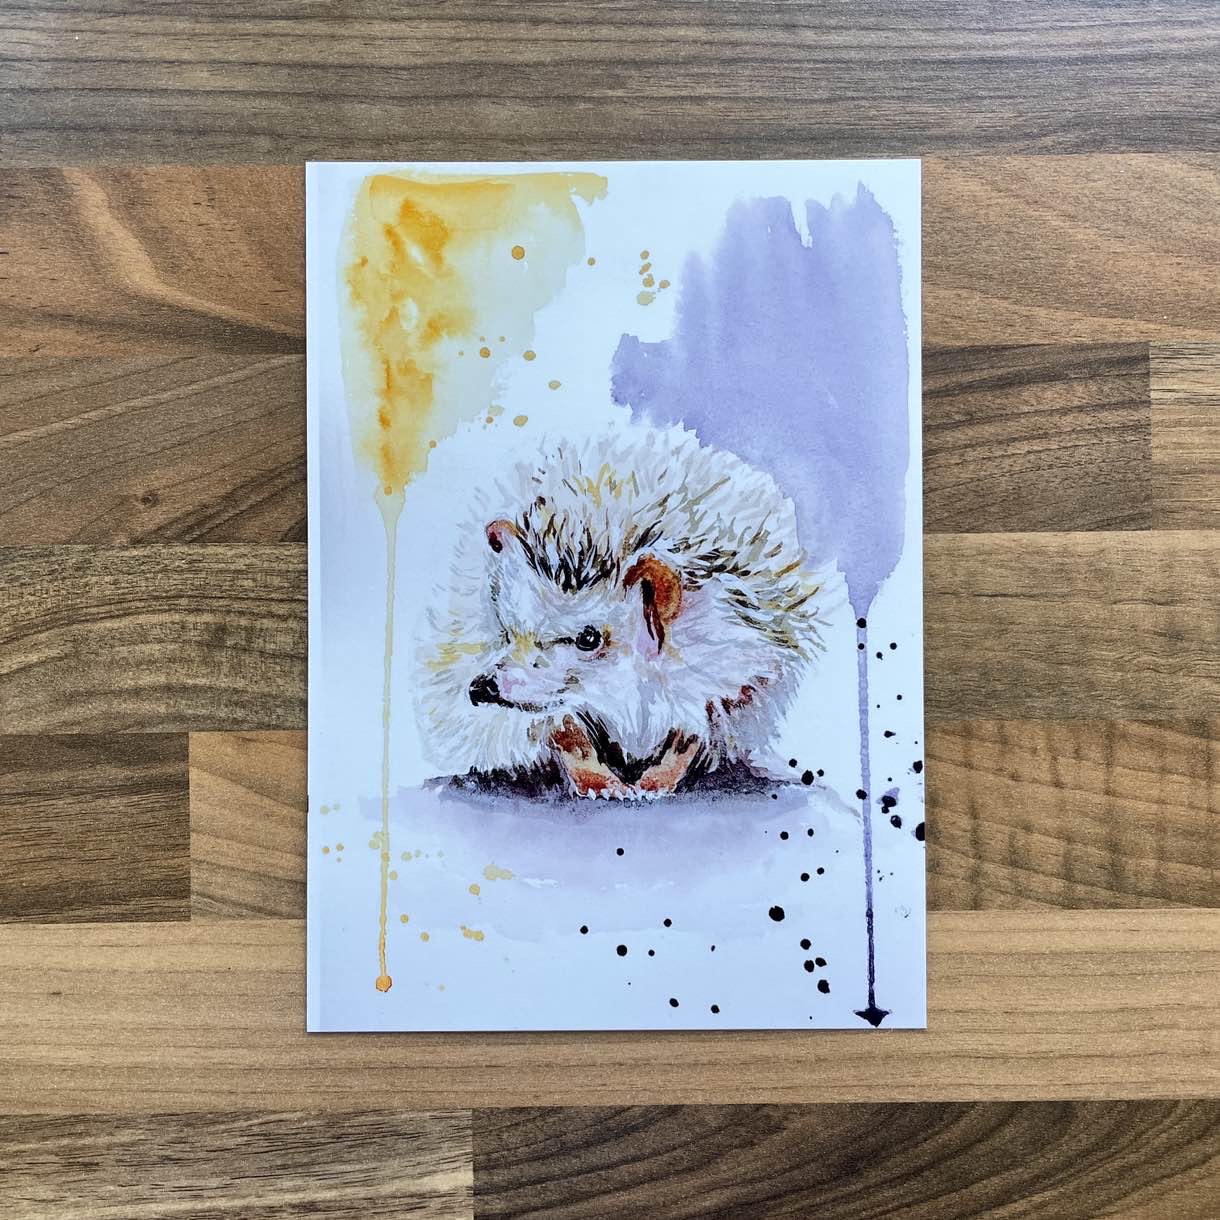 Watercolour painting of a hedgehog with playful yellow and purple paint splashes